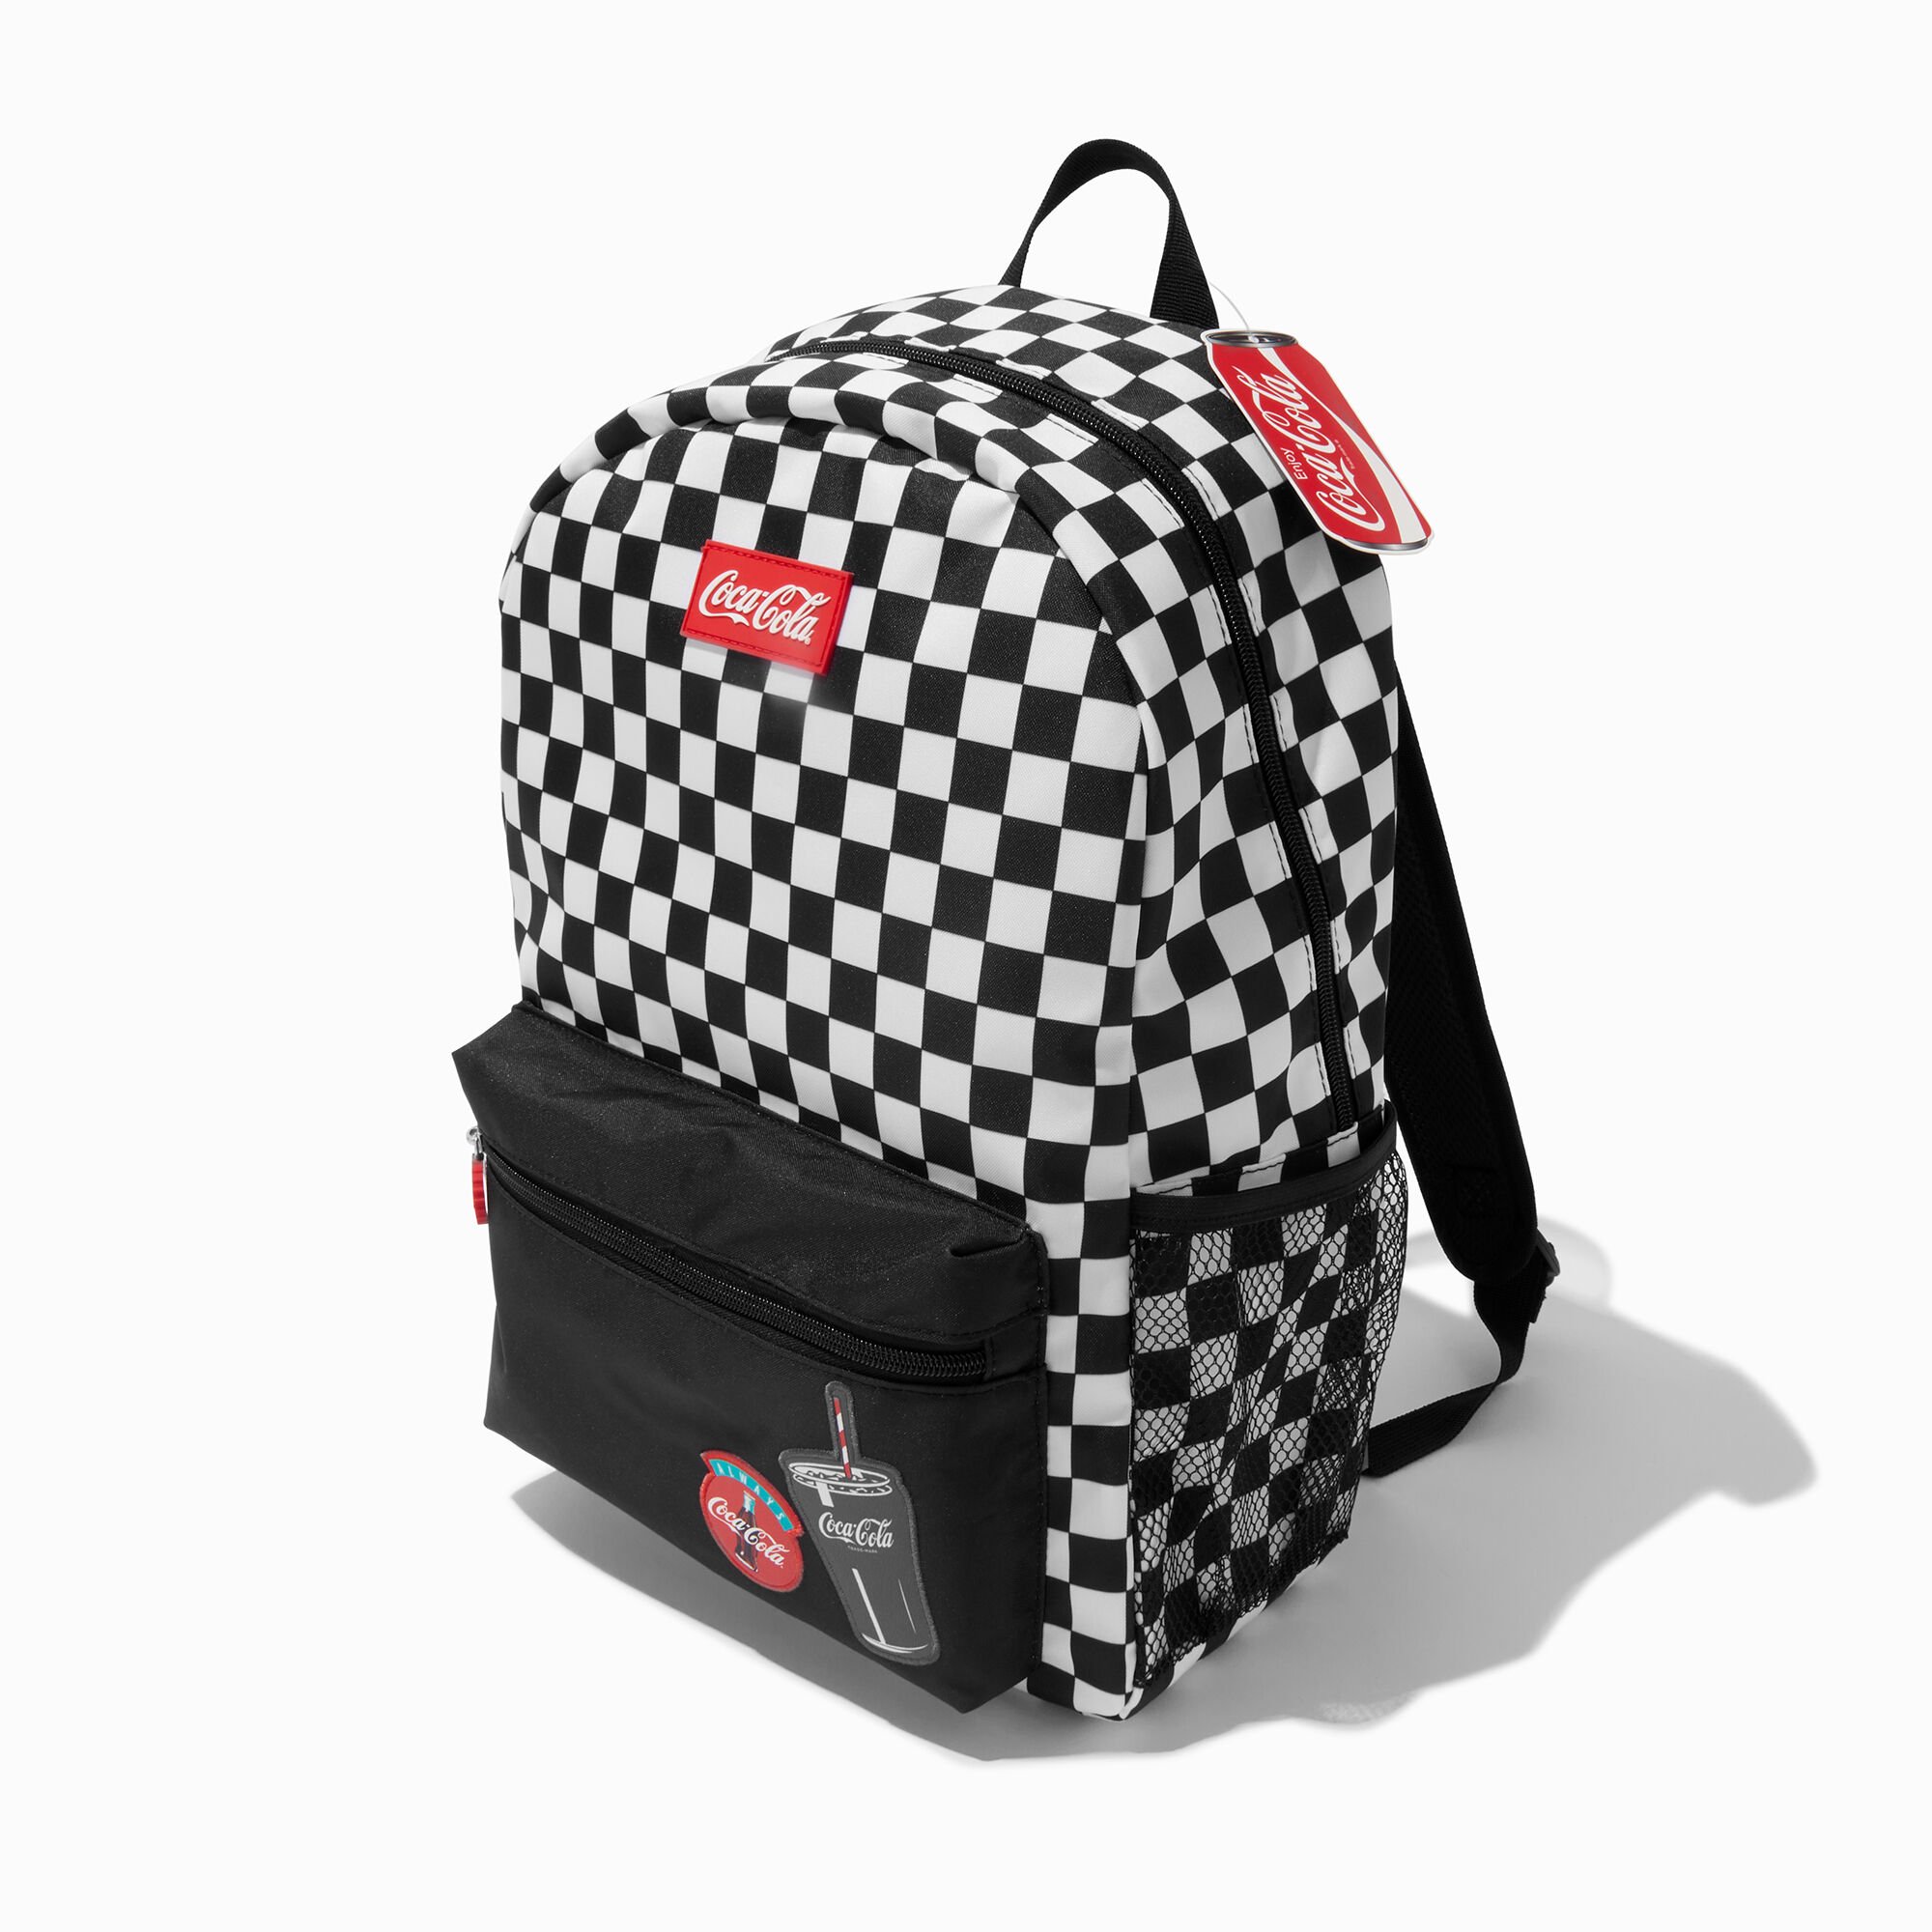 View Claires CocaCola Checkered Backpack information